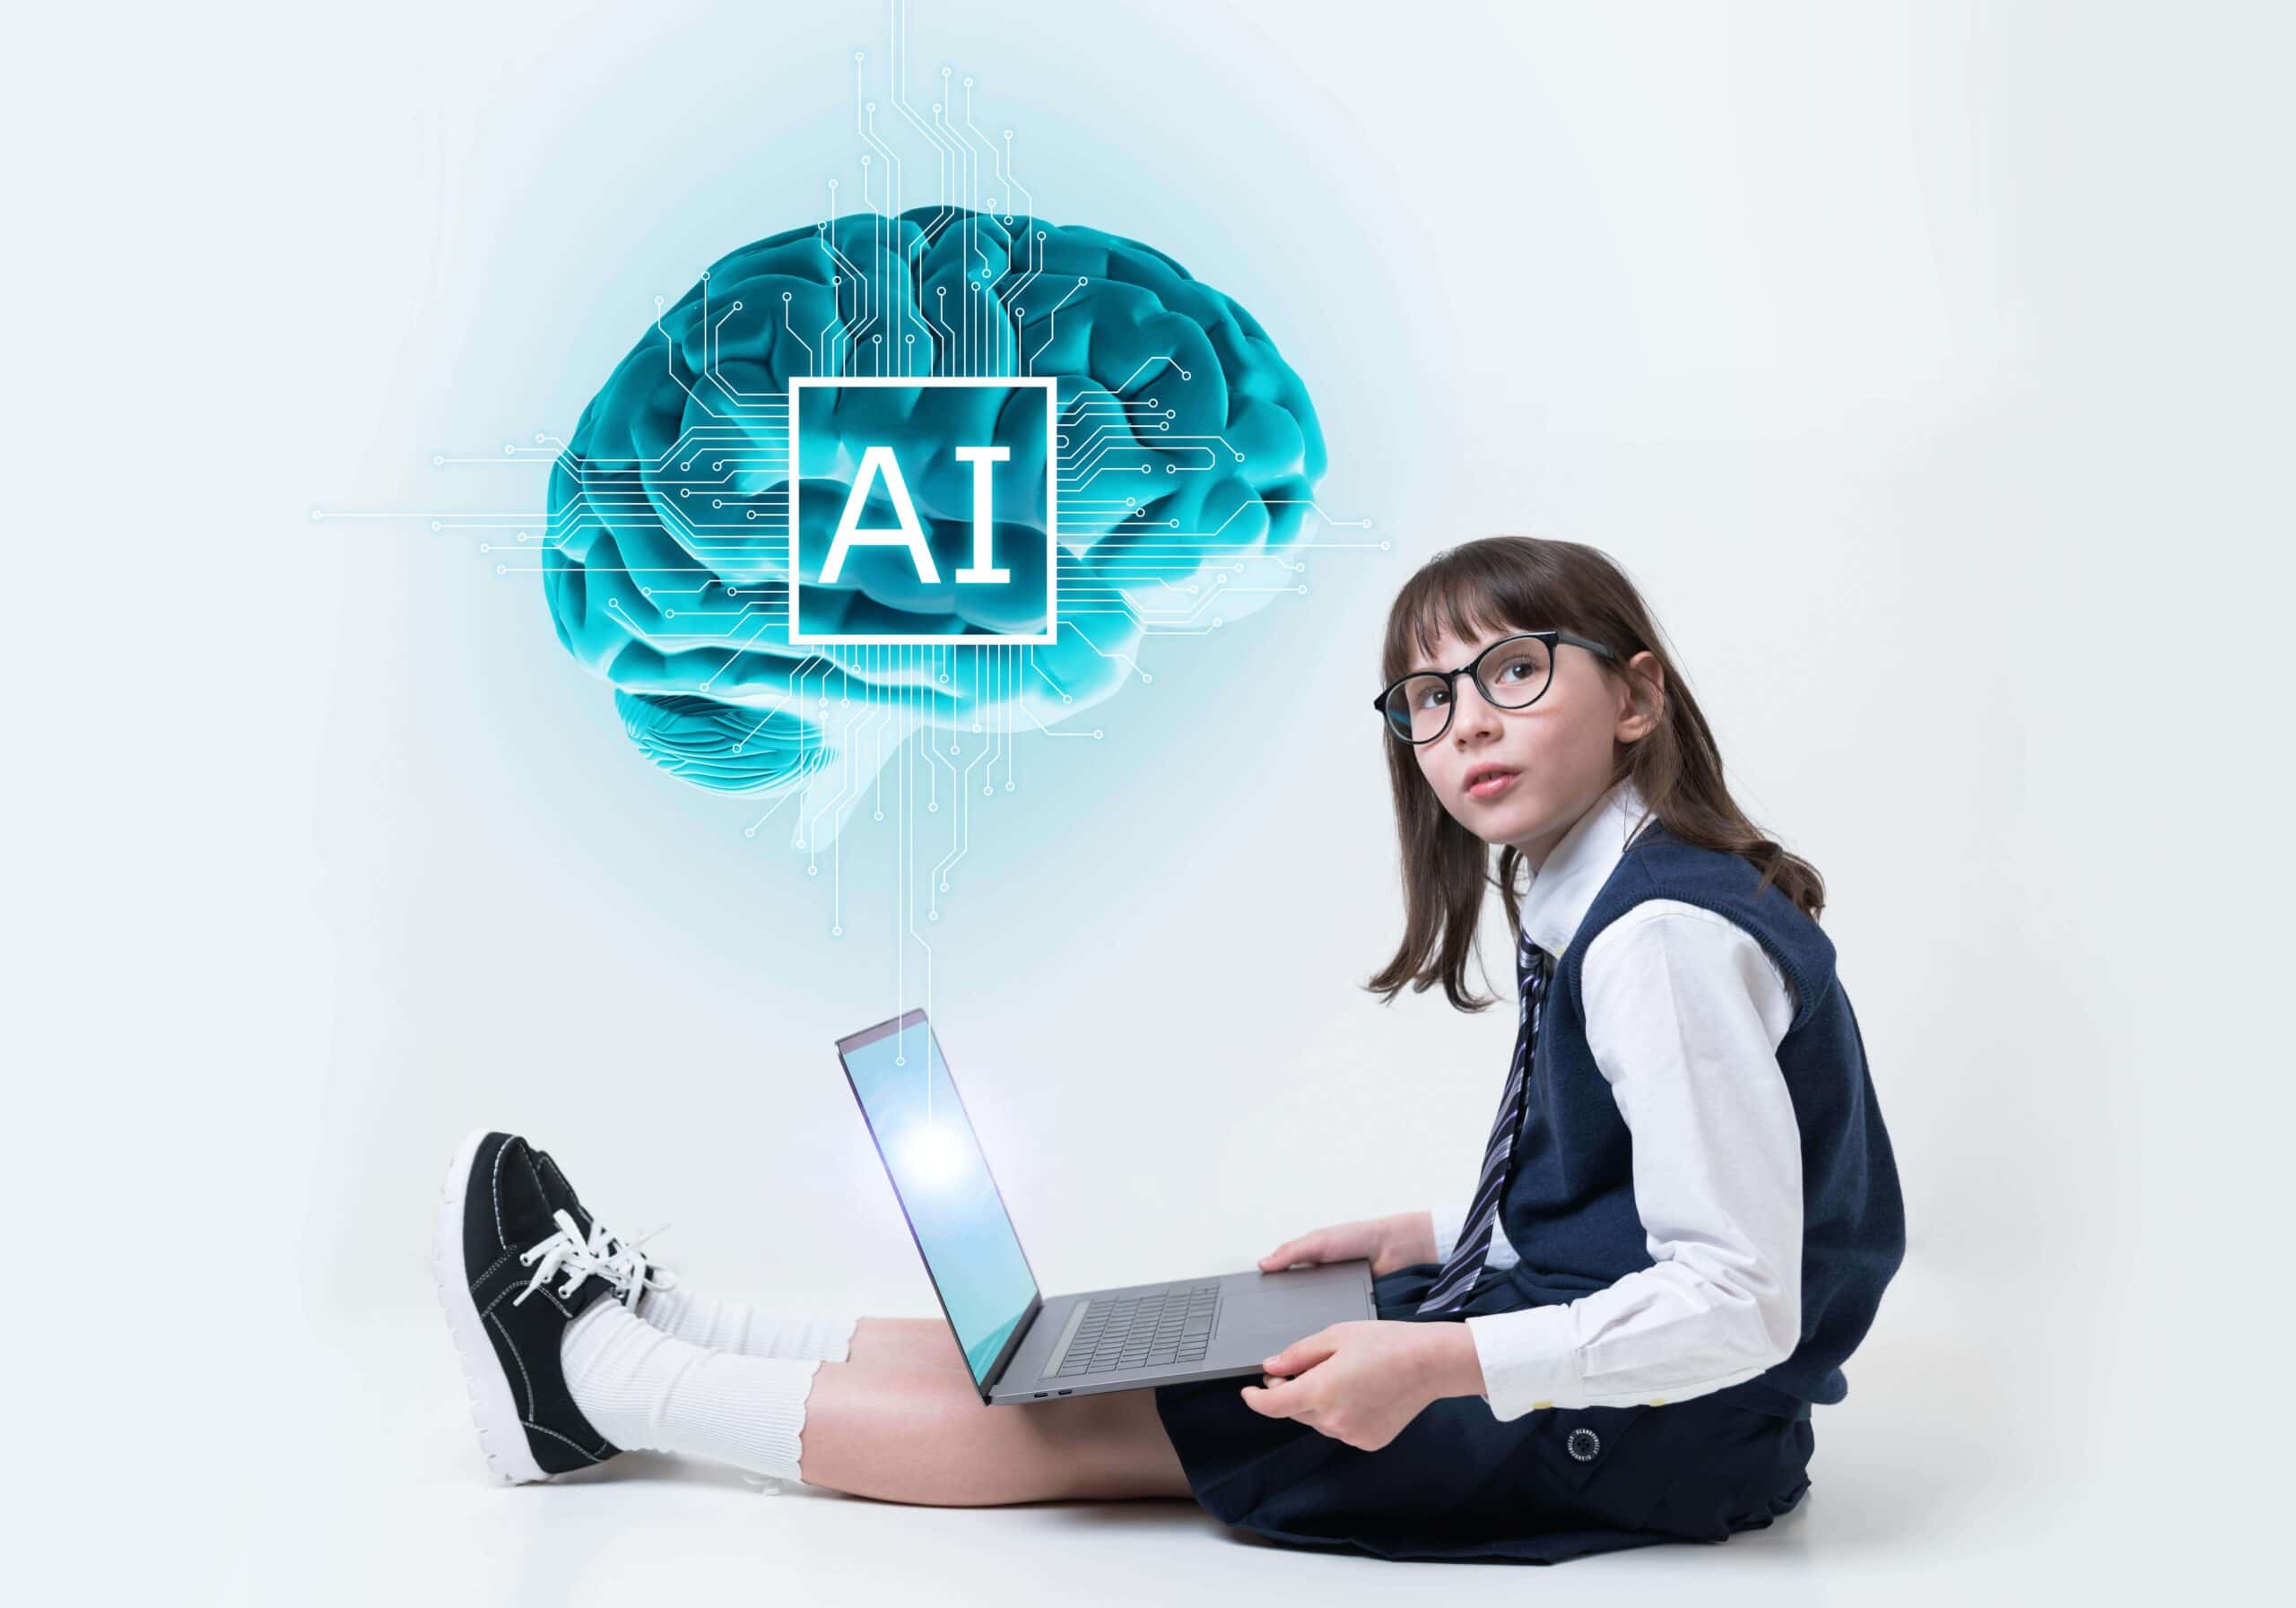 Young student sitting on the floor with a laptop and a digital image of a brain with the letters AI floating overhead.